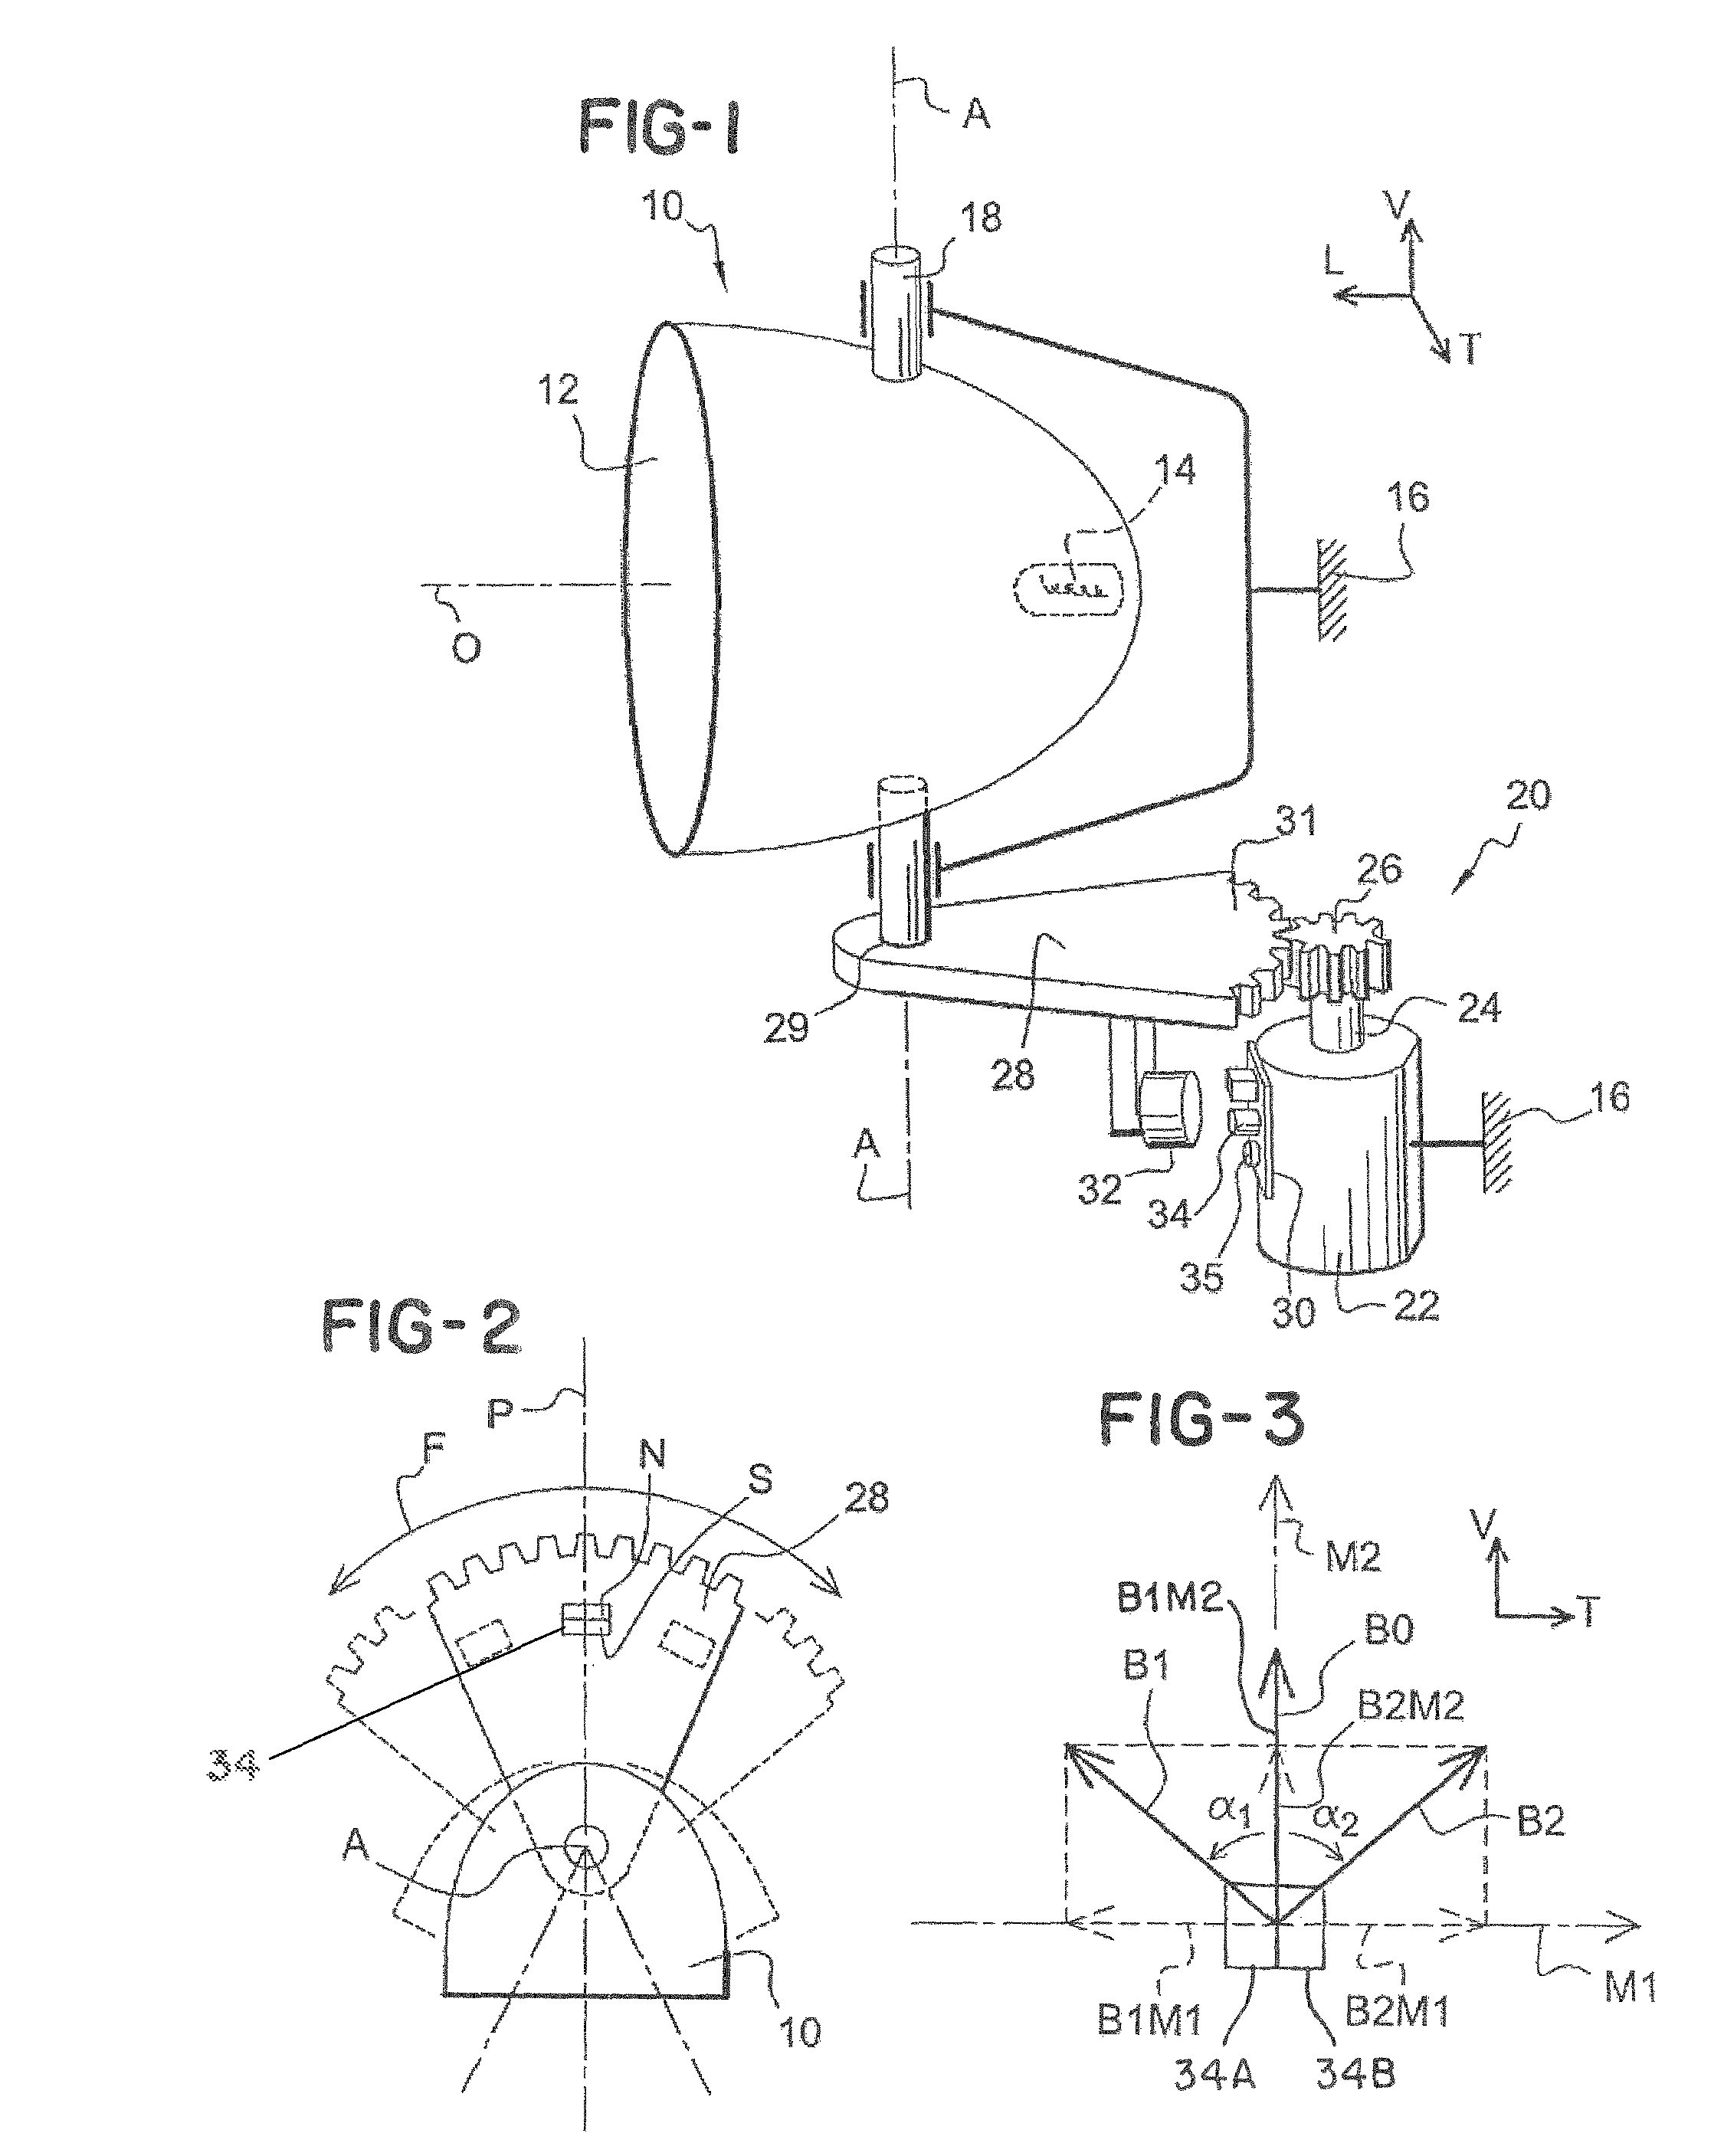 Method of determining the angular position of a headlight by several magnetic field measurement means